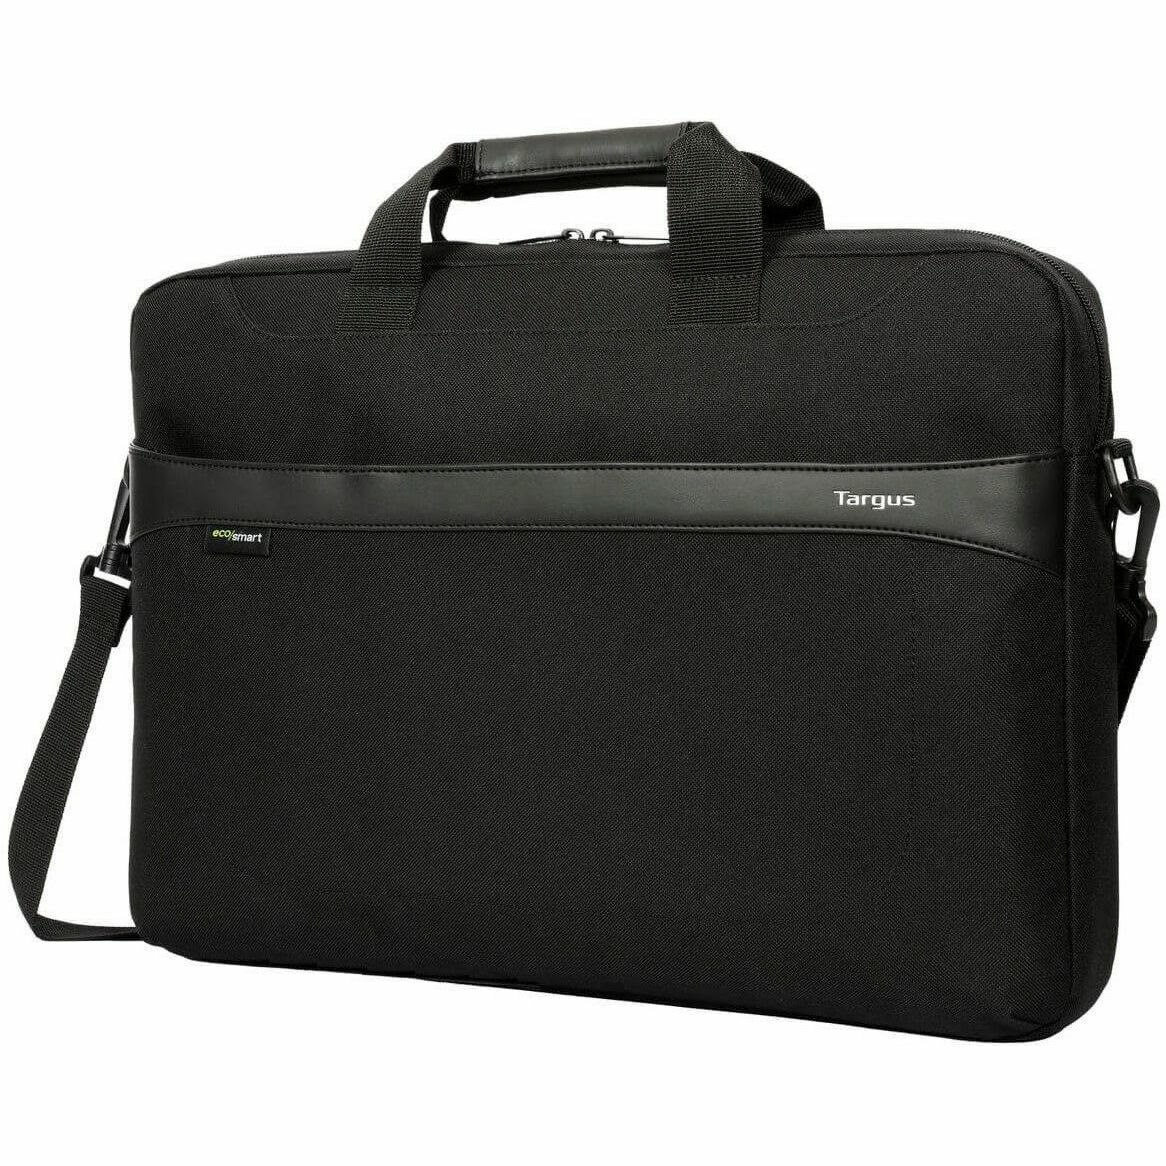 Targus GeoLite EcoSmart TSS984GL Carrying Case (Briefcase) for 38.1 cm (15") to 40.6 cm (16") Notebook, Document, File - Black